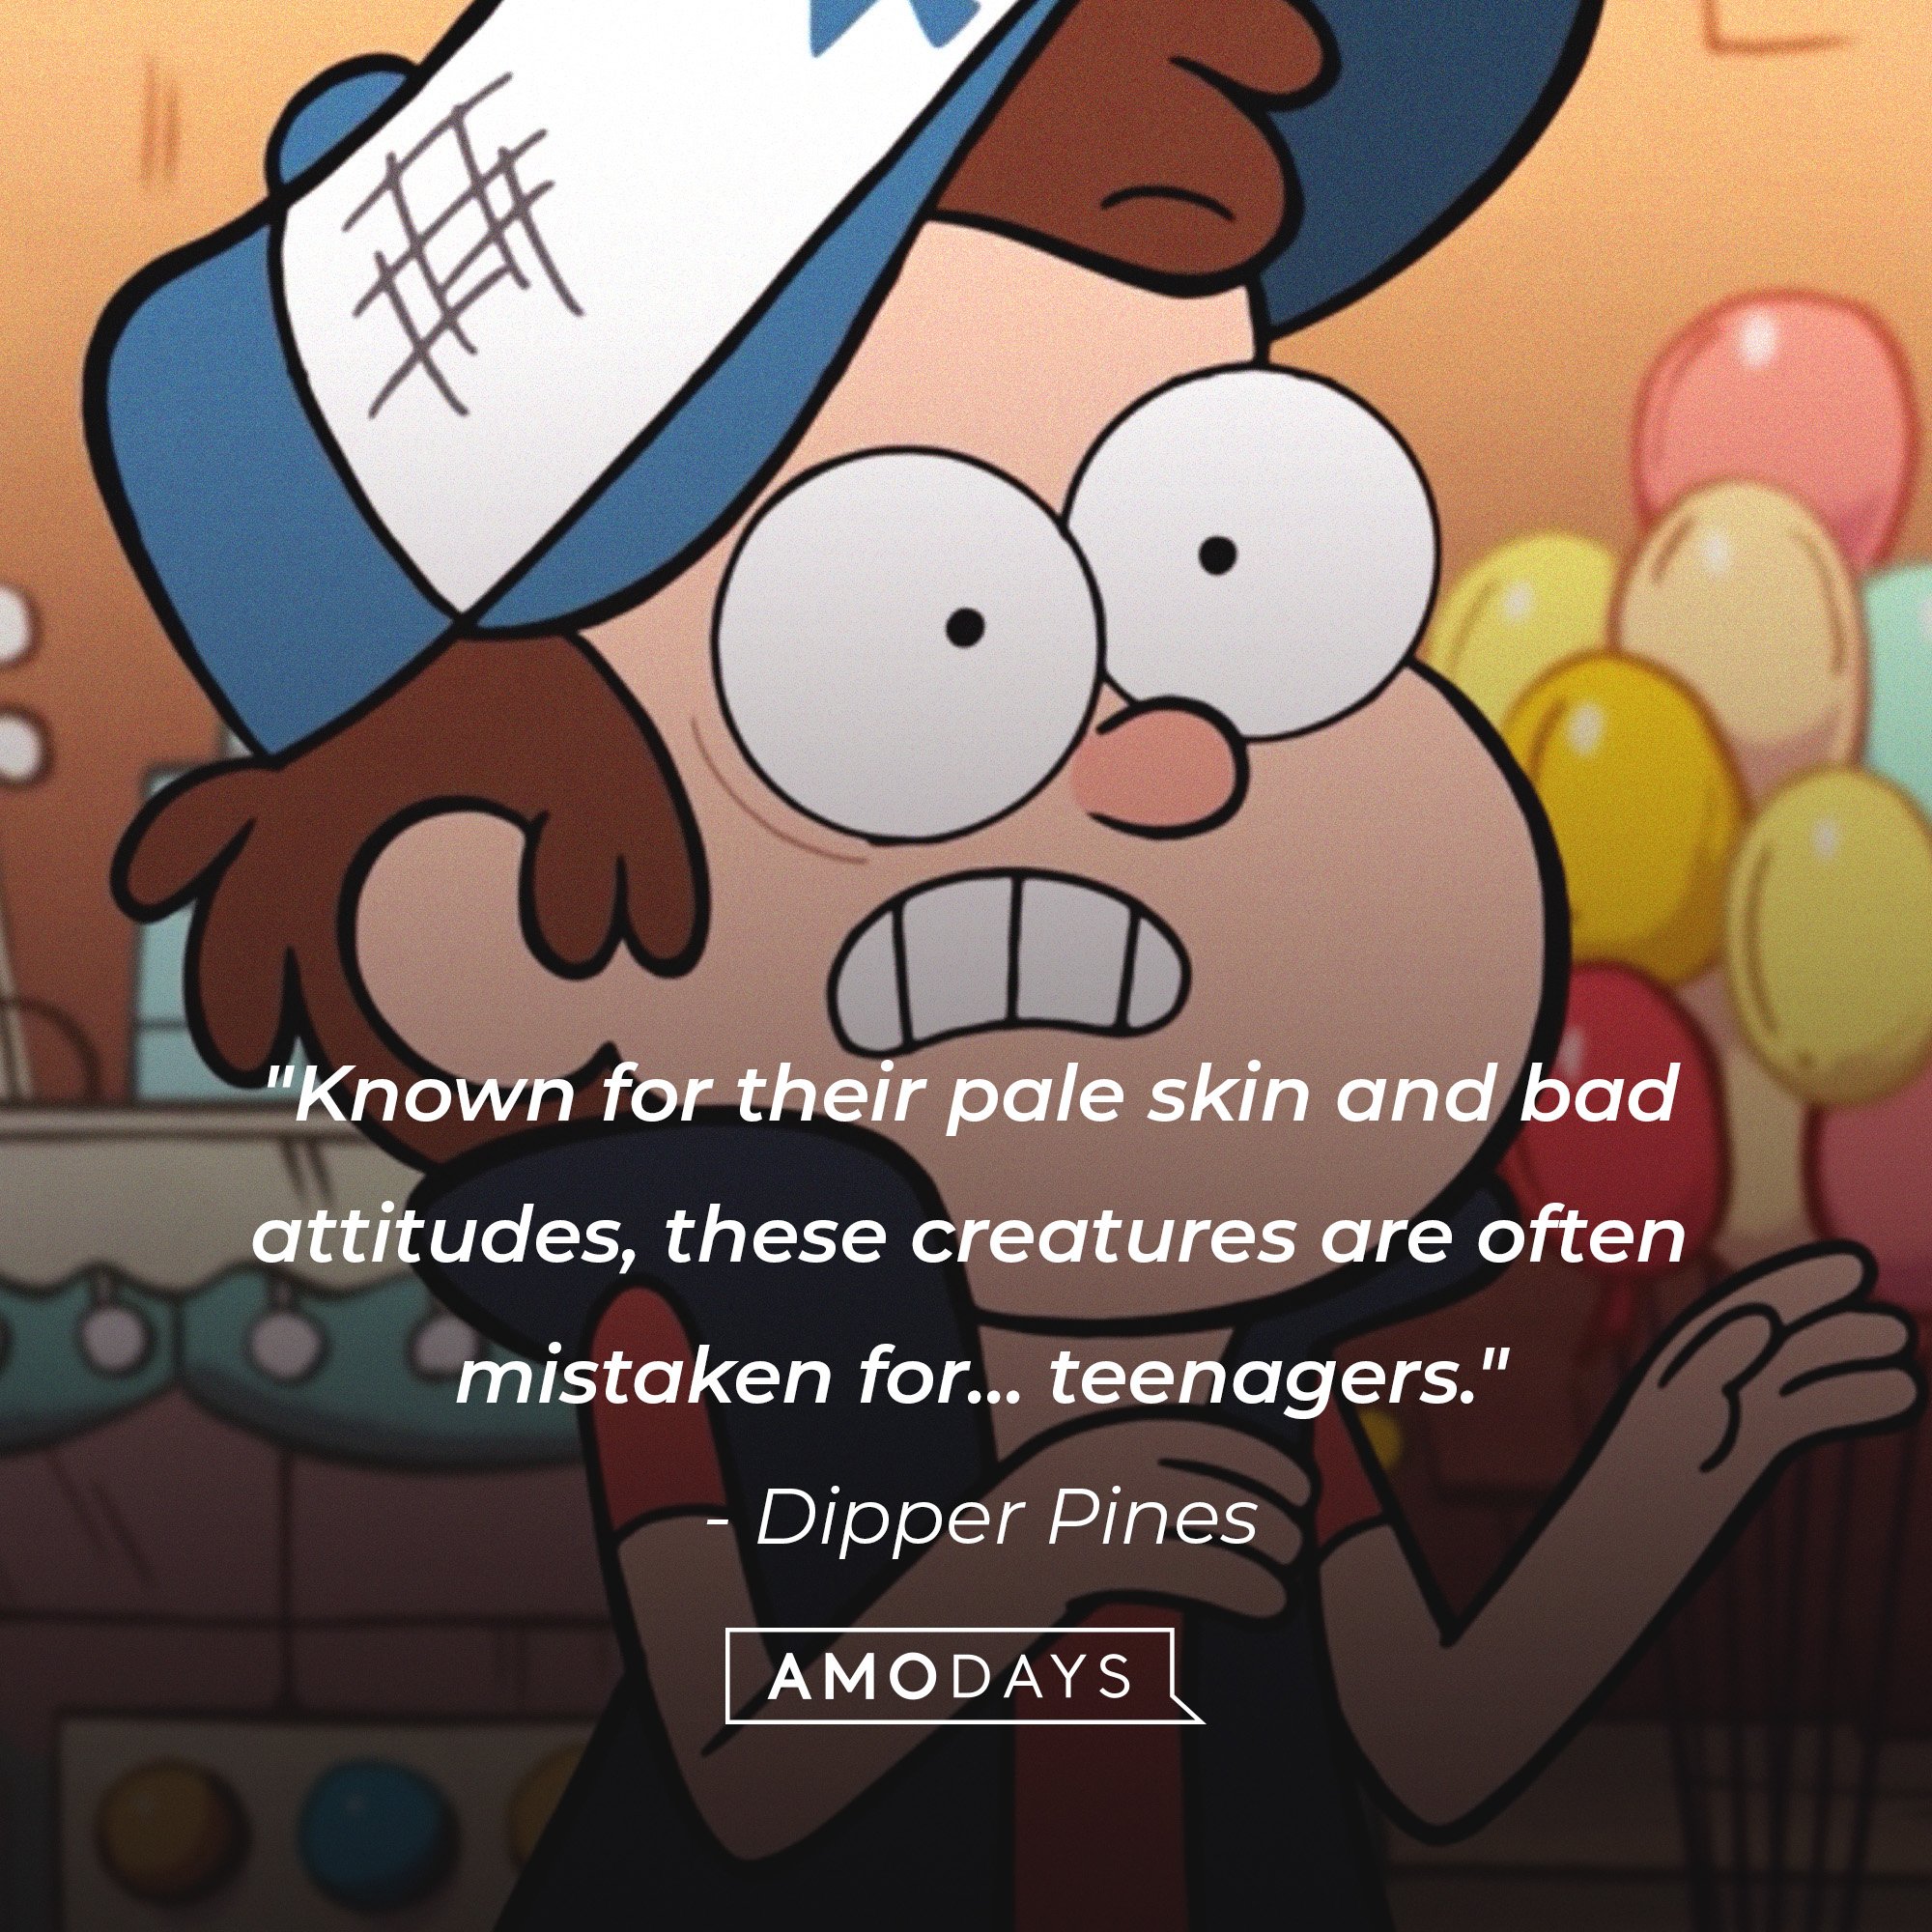 Dipper Pines’ quote: "Known for their pale skin and bad attitudes, these creatures are often mistaken for... teenagers." | Image: AmoDays